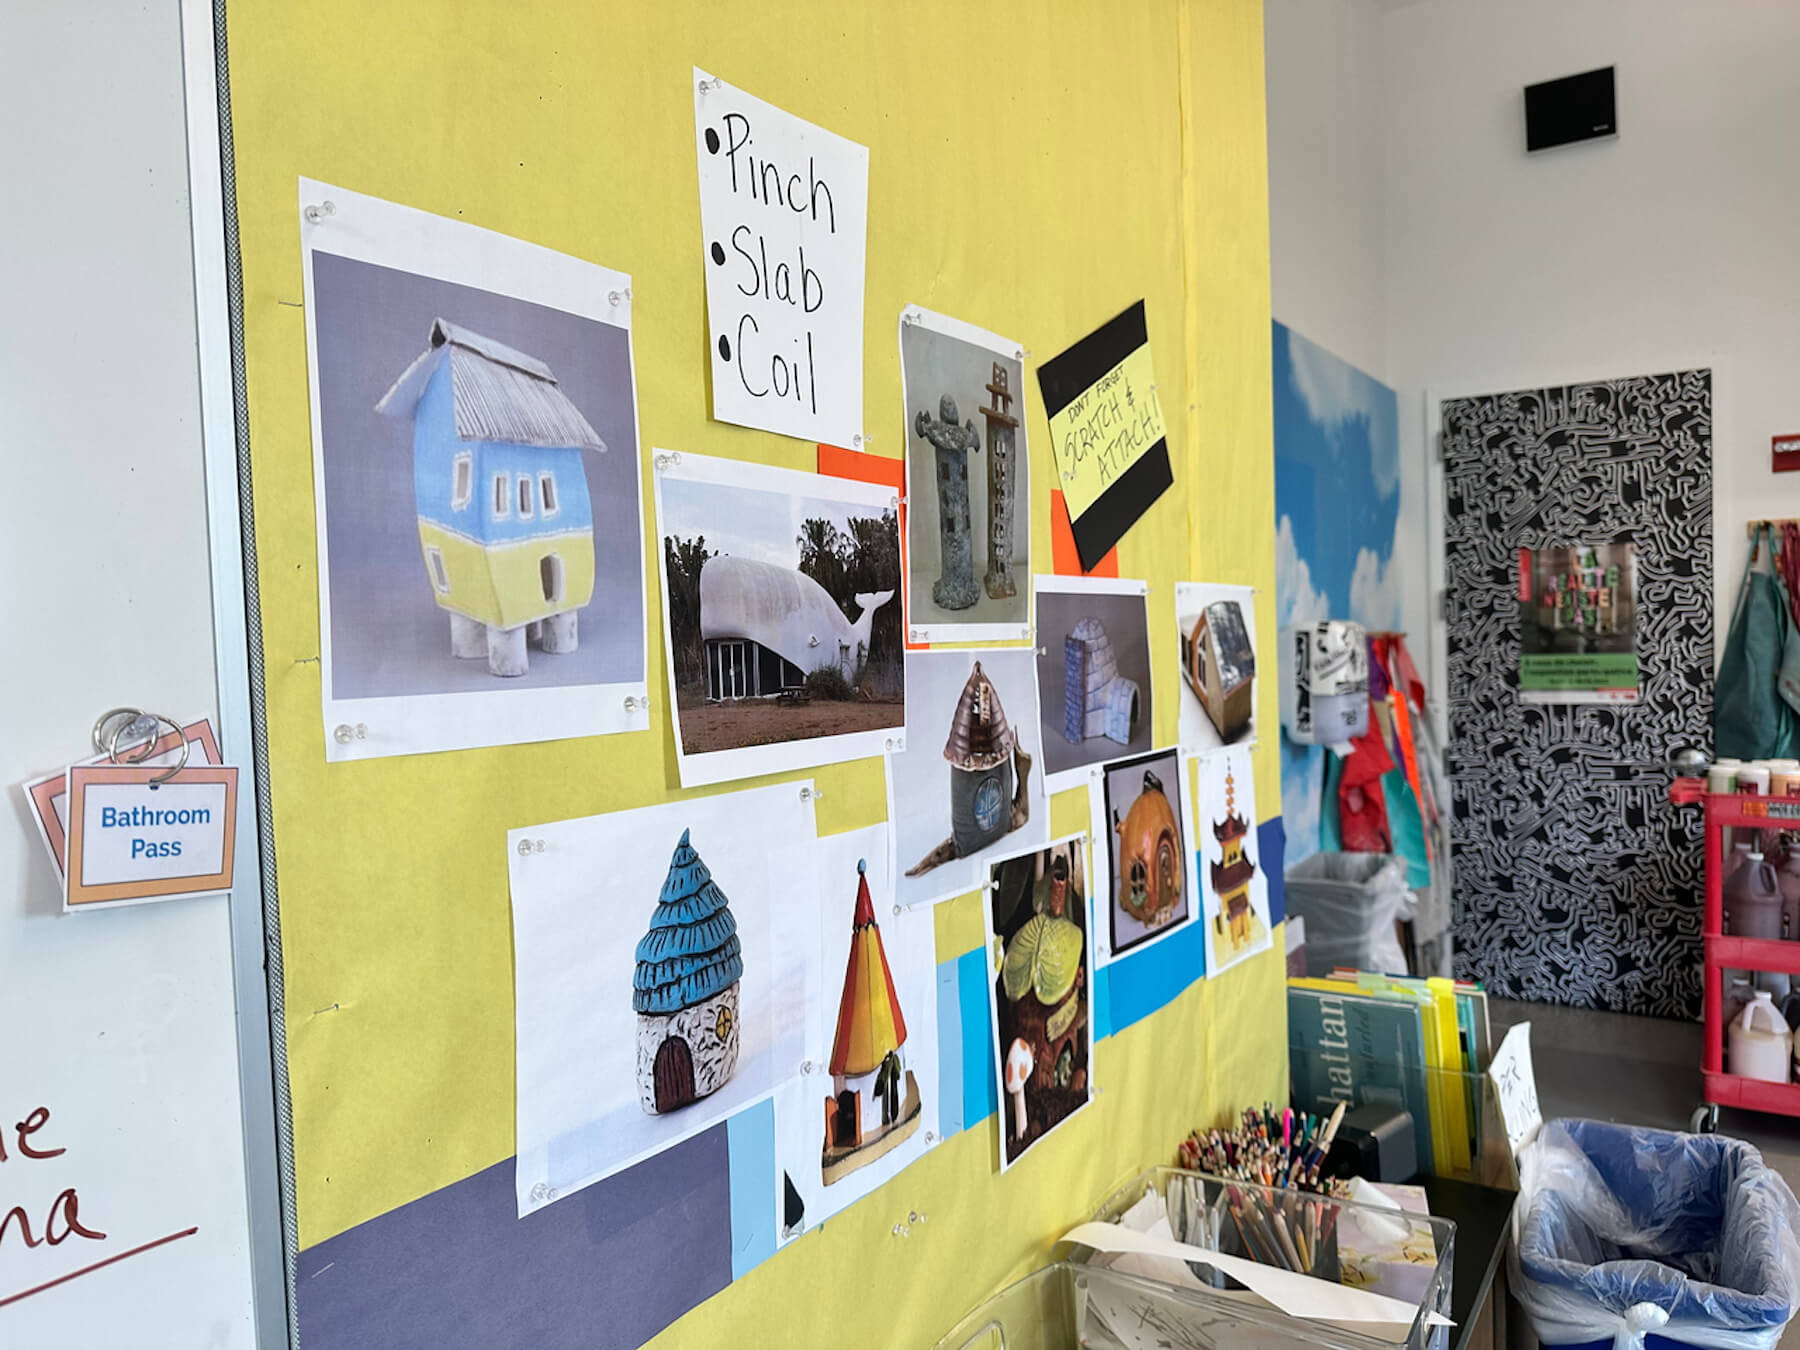 The walls of the Ethical Culture art room are decorated with photographs that serve as inspiration for the students' ceramics projects.